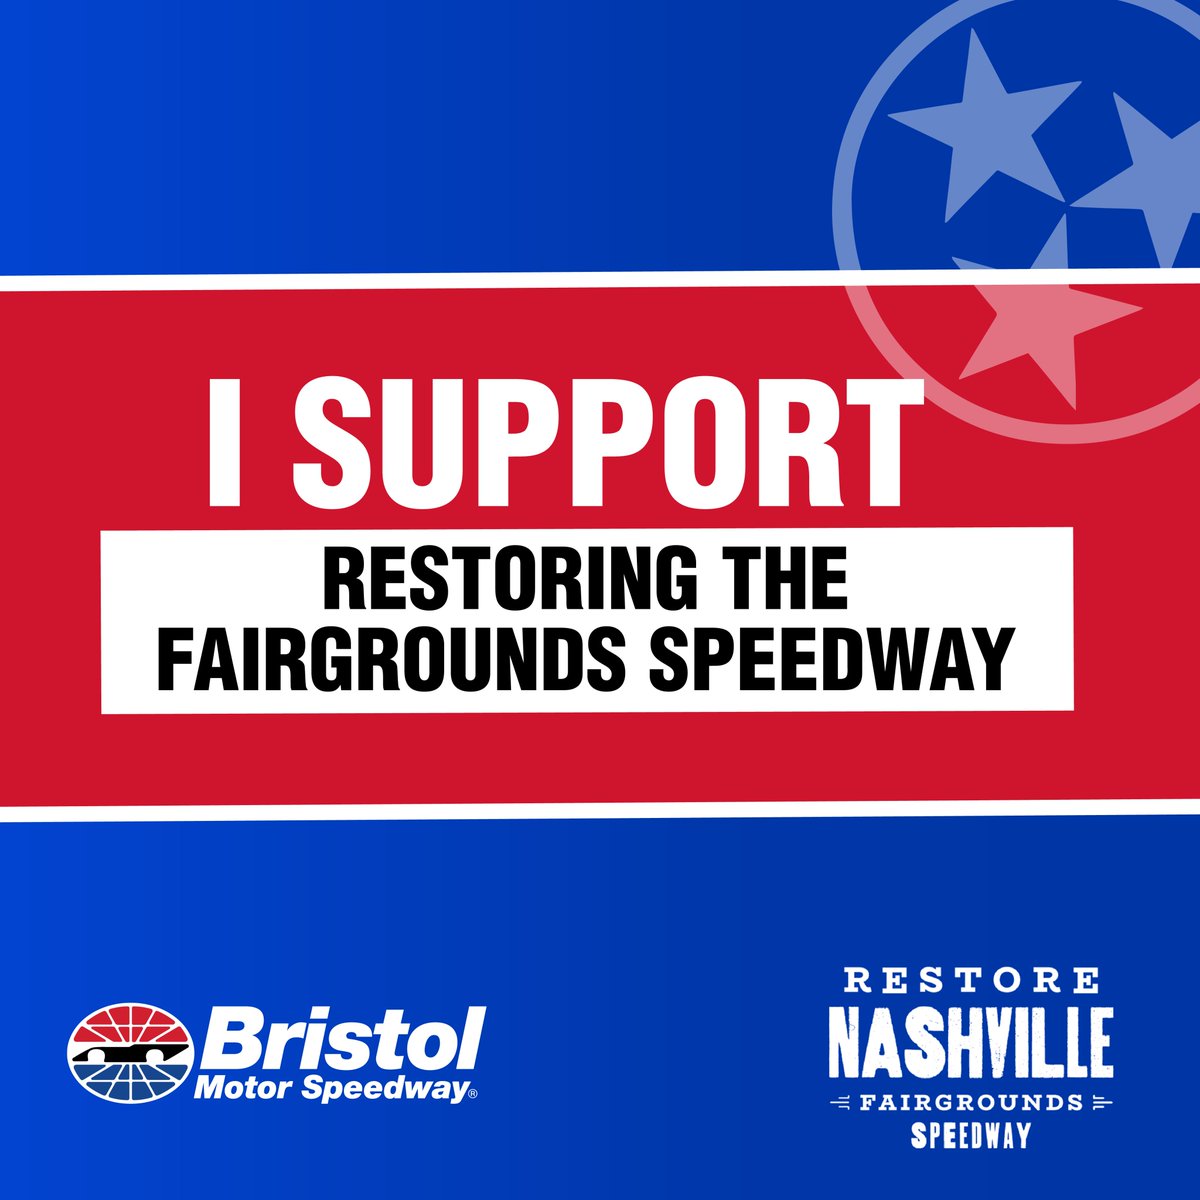 SHARE: If you support restoring the historic Fairgrounds Speedway, 𝐏𝐋𝐄𝐀𝐒𝐄 𝐒𝐇𝐀𝐑𝐄 𝐓𝐇𝐈𝐒 𝐏𝐎𝐒𝐓.  To go one step further, send Metro Council a letter at the link below!  Let your voice BE HEARD! LINK: bit.ly/43xJiwo @ZachYoungTN @AllenBurkley